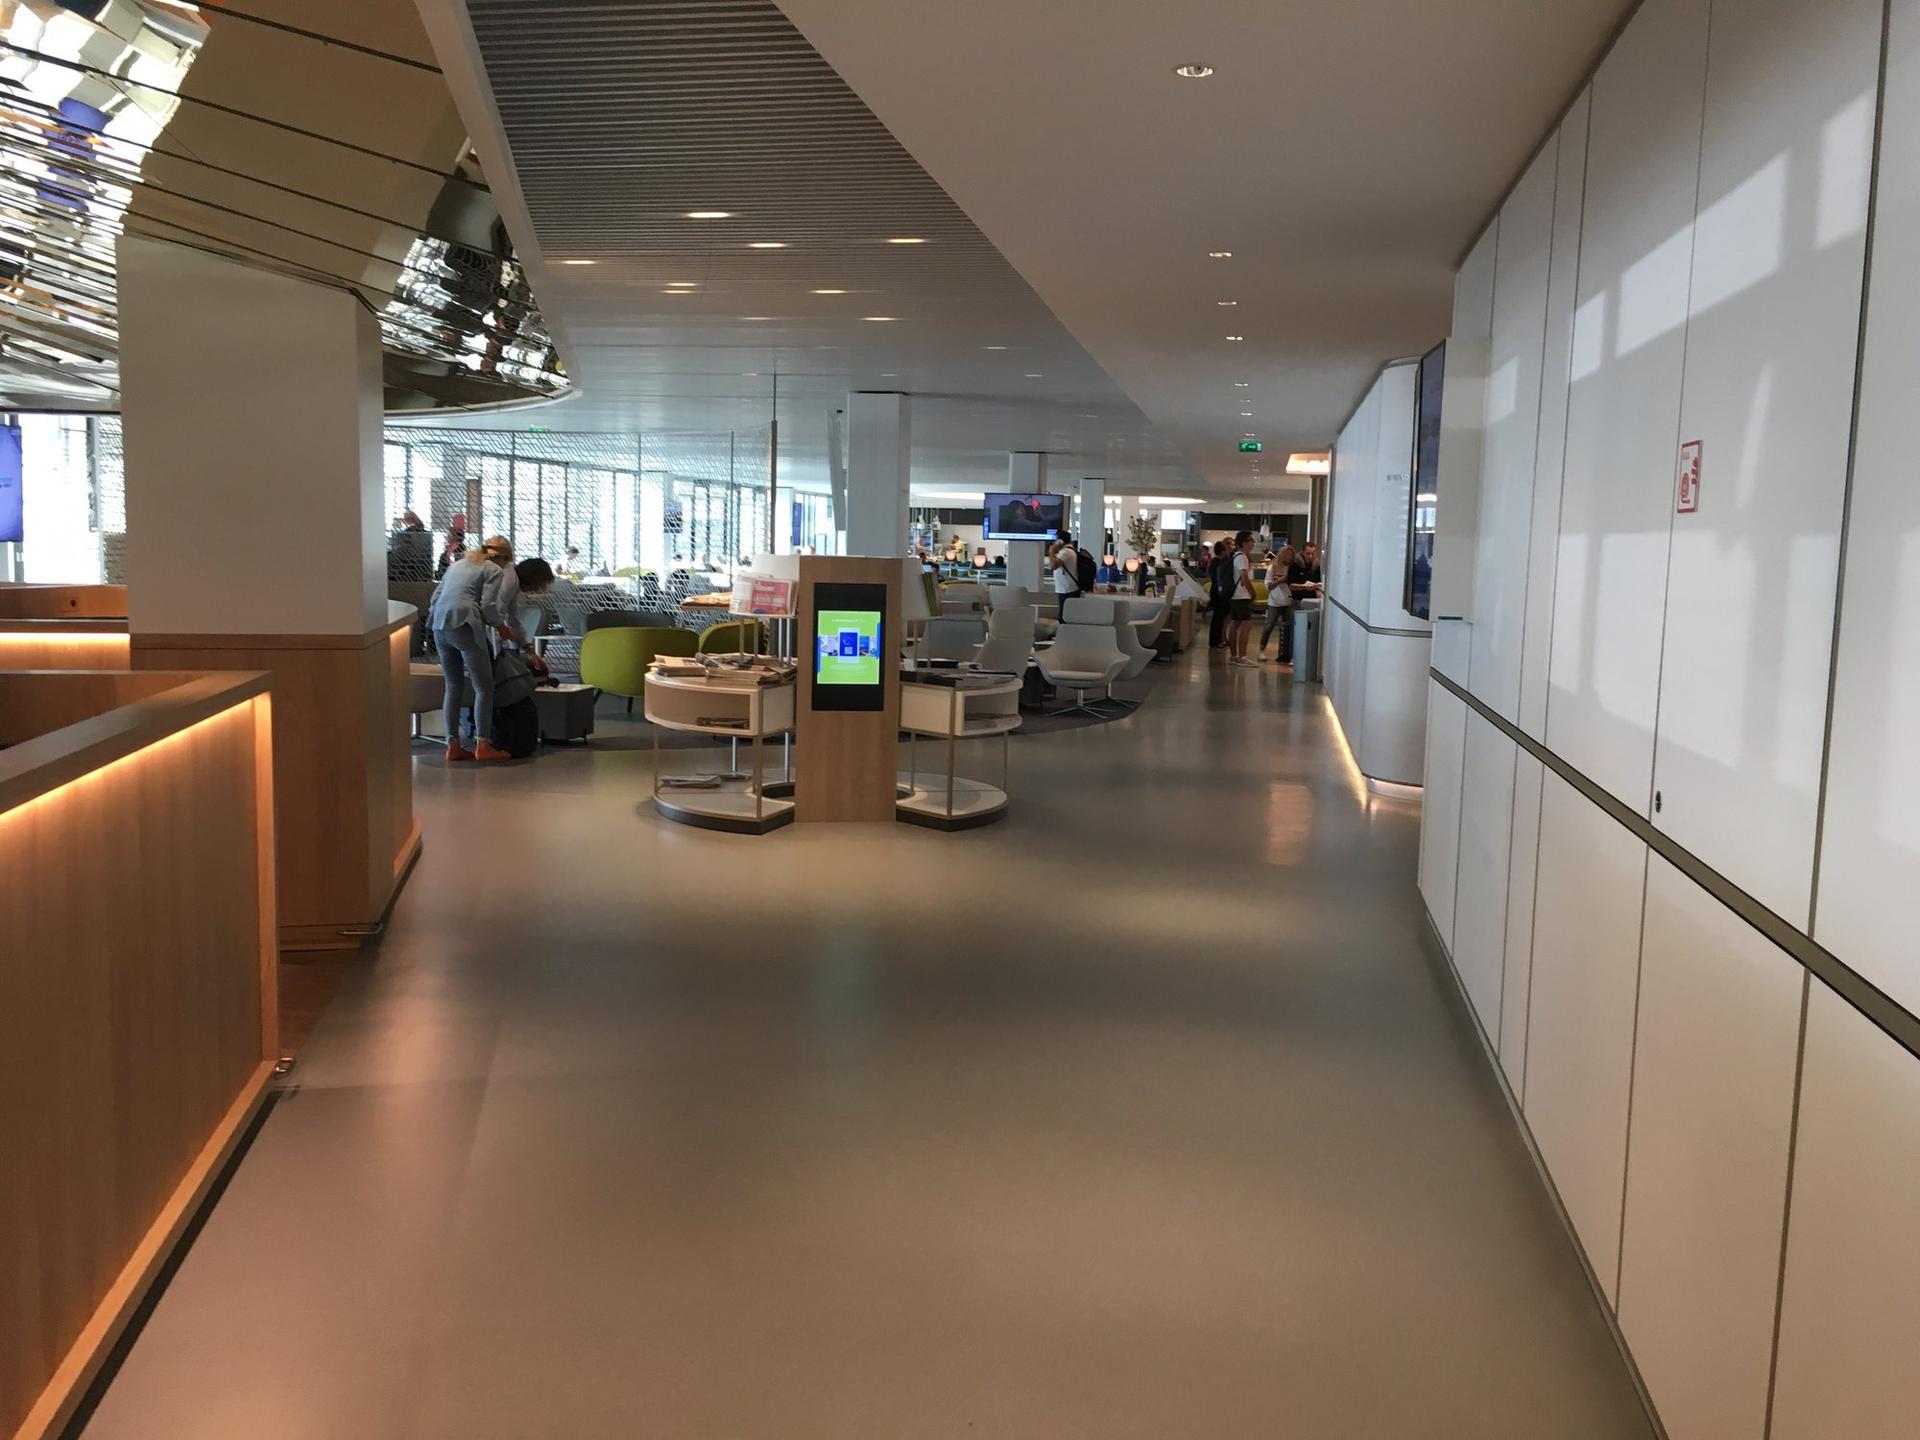 Air France Lounge (Concourse L) image 10 of 57